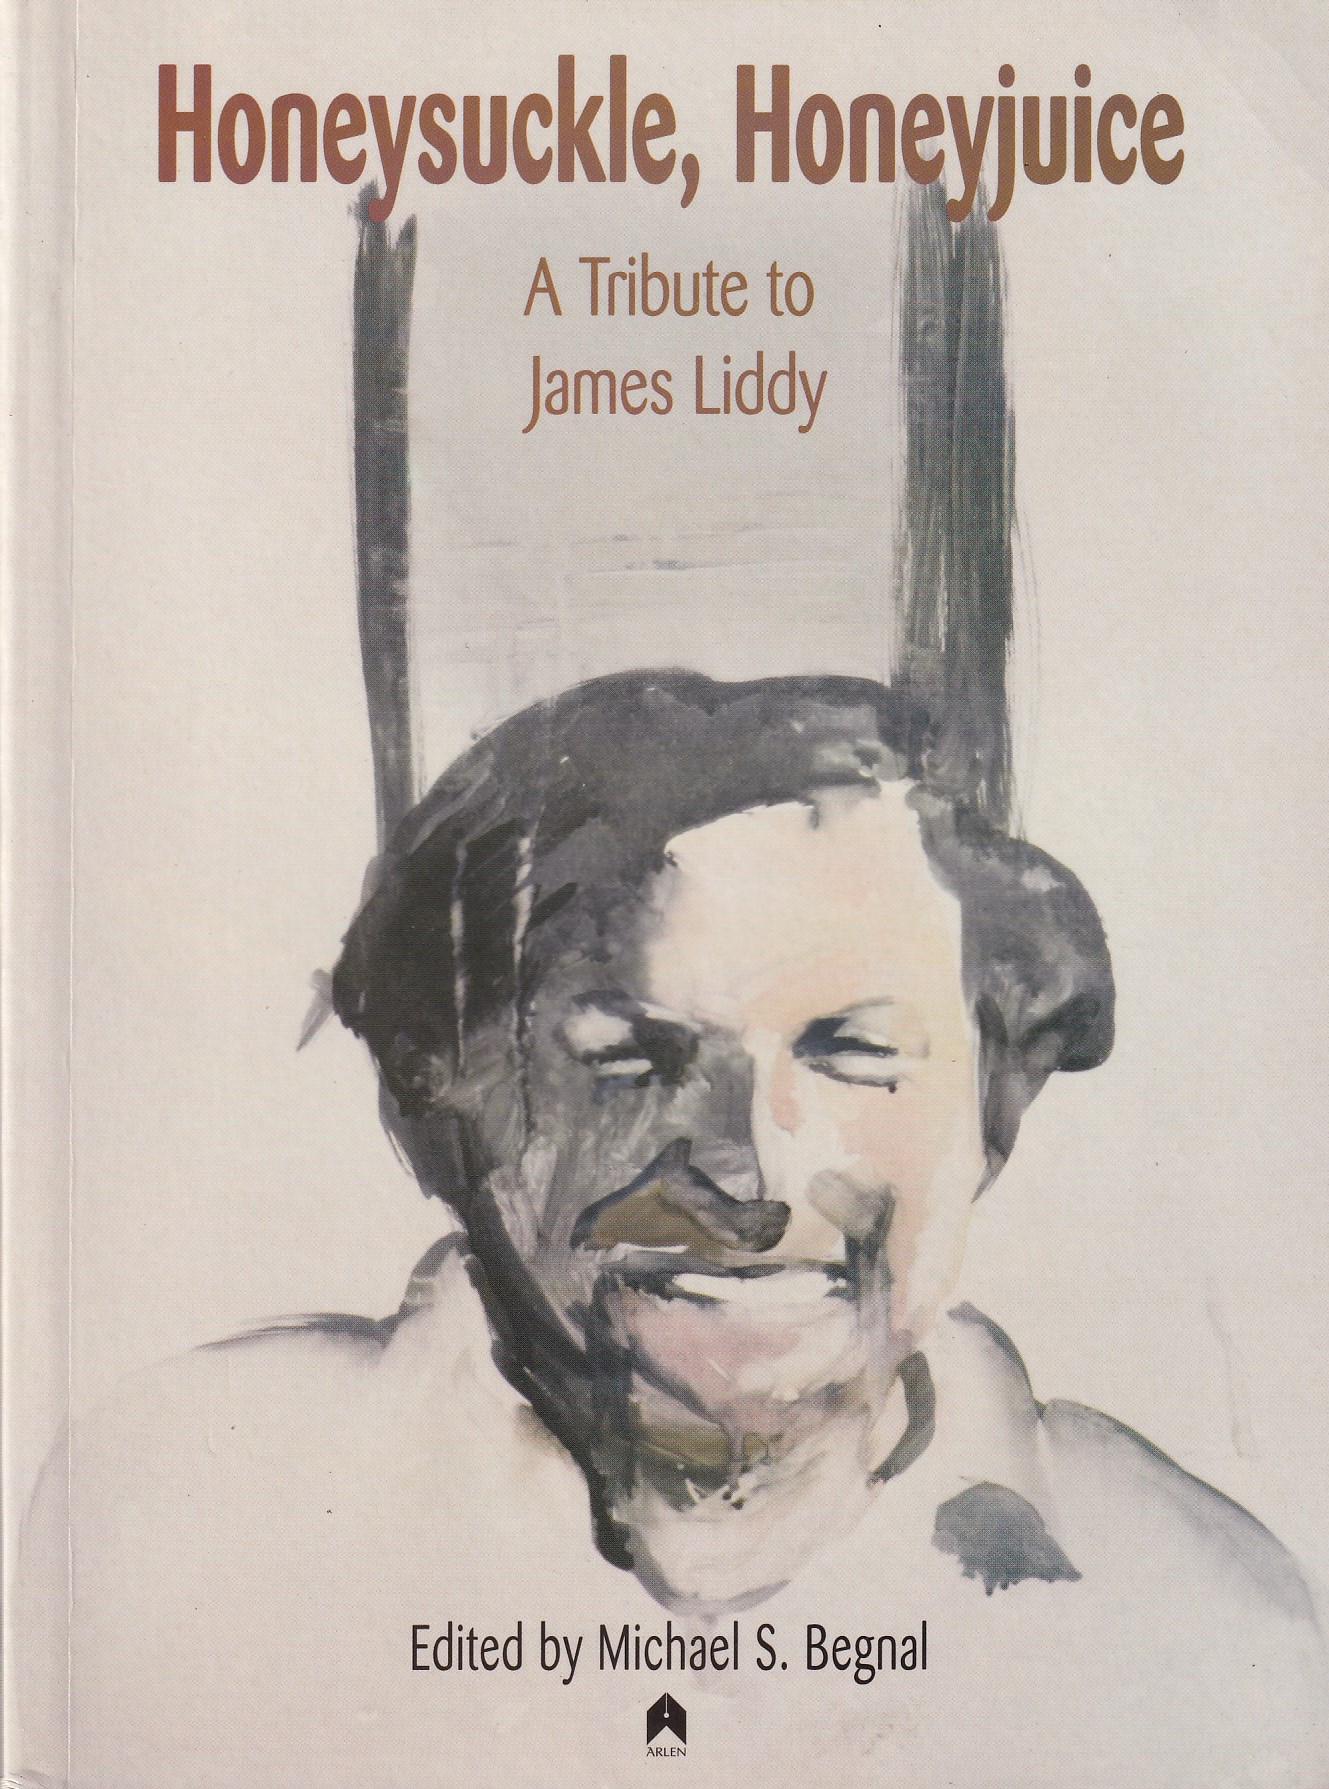 Honeysuckle, Honeyjuice: A Tribute to James Liddy | Michael S. Begnal (ed.) | Charlie Byrne's